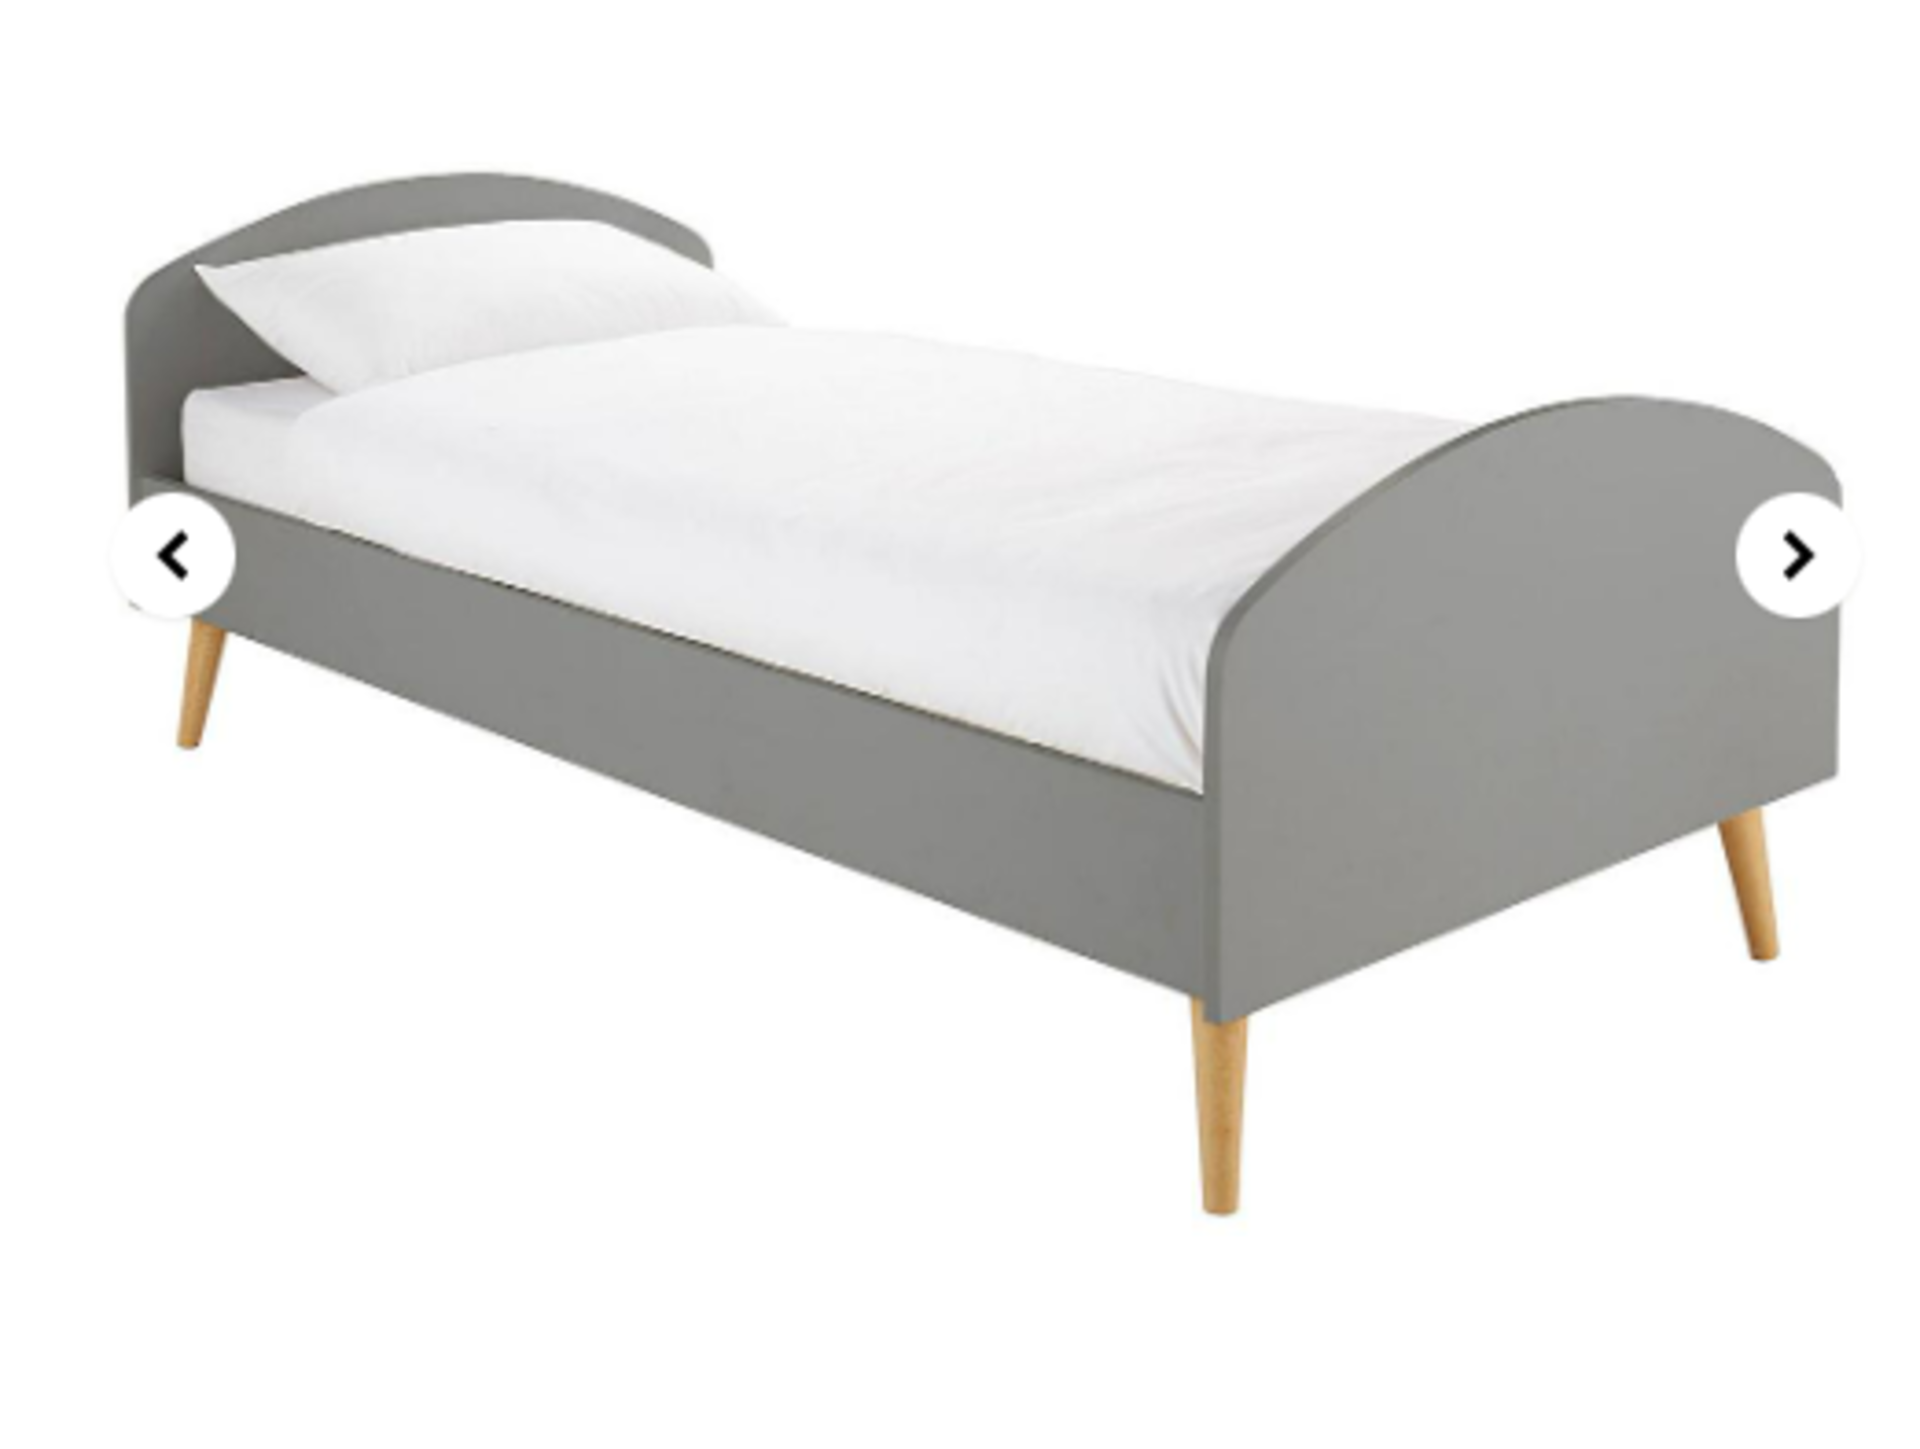 NEW & BOXED Olsen Bed Frames. RRP £399. Stylish as well as practical, the Olsen Bed Frame is perfect - Image 2 of 4